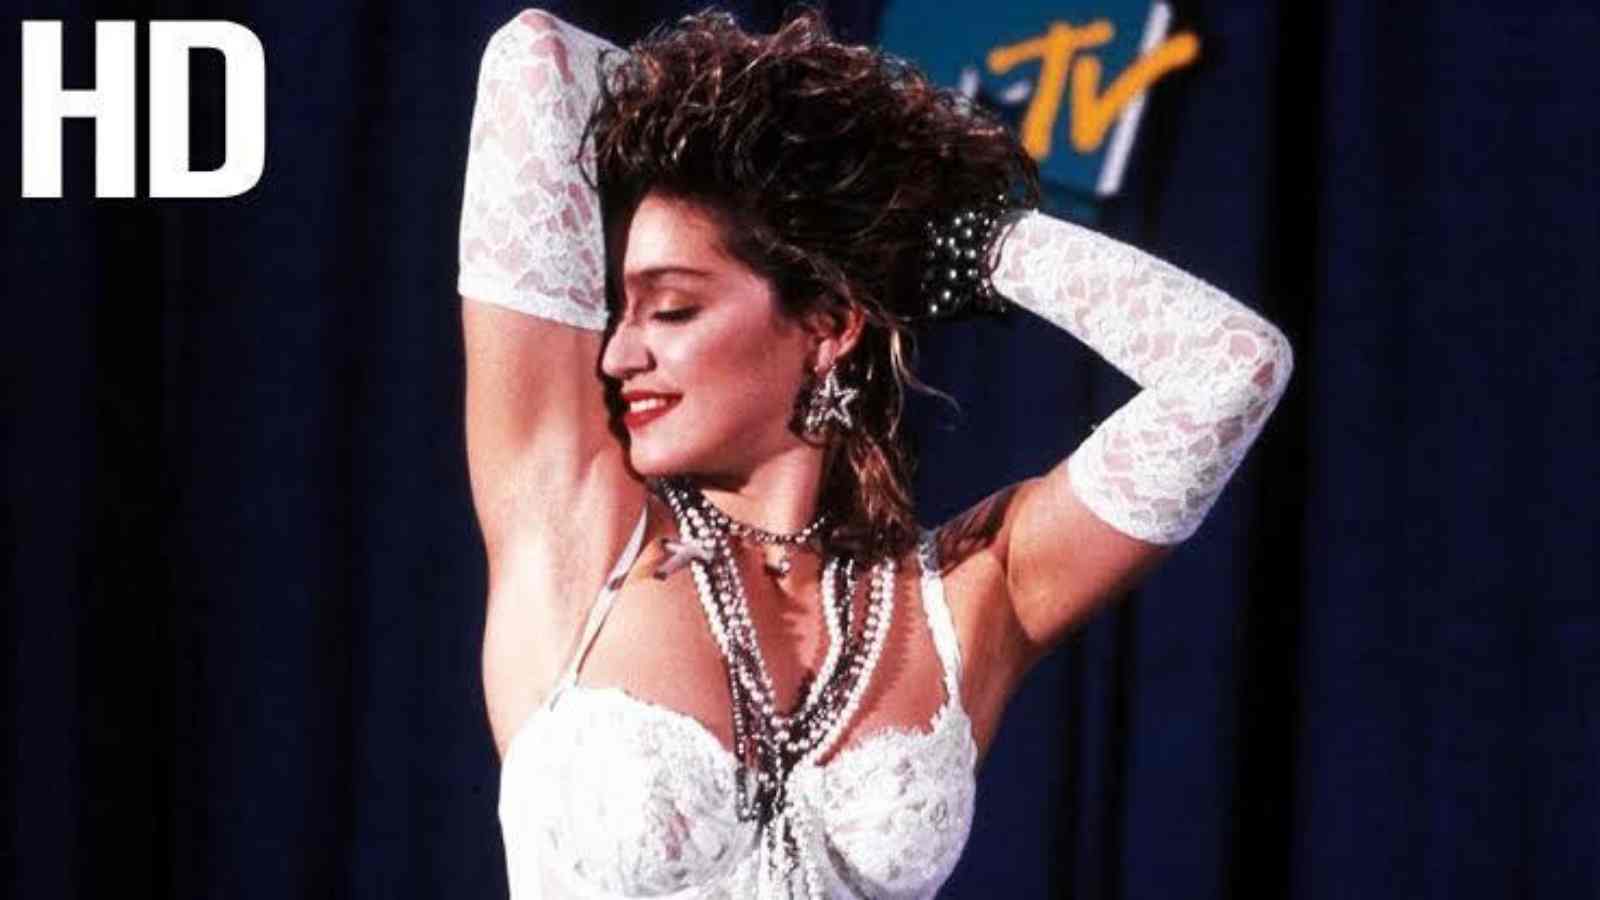 The 1984 'scandalous' performance which almost ended Madonna's career